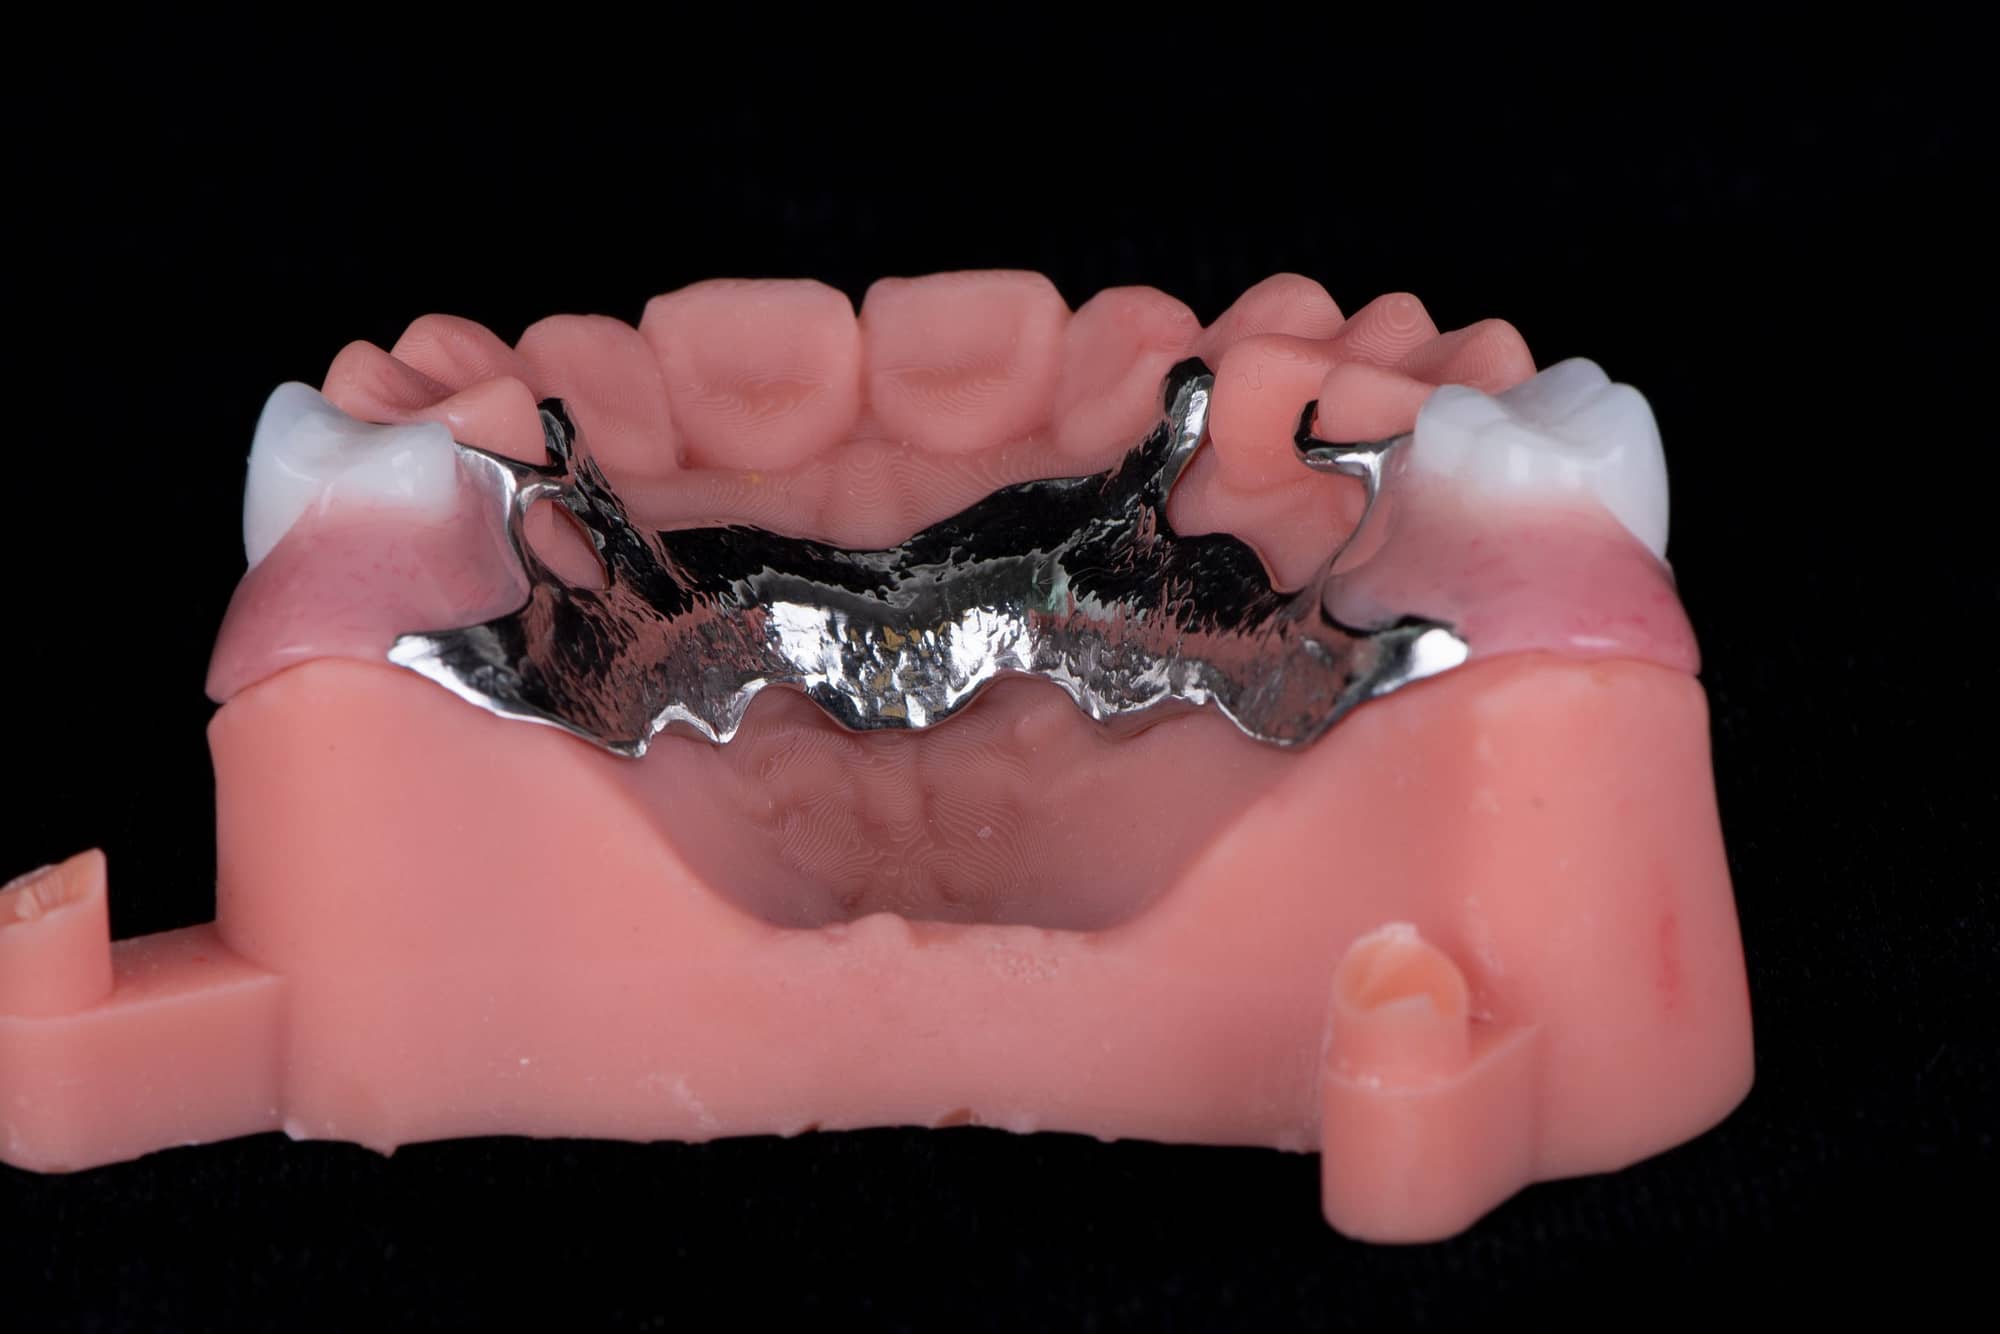 Removable partial denture on a 3D printed model